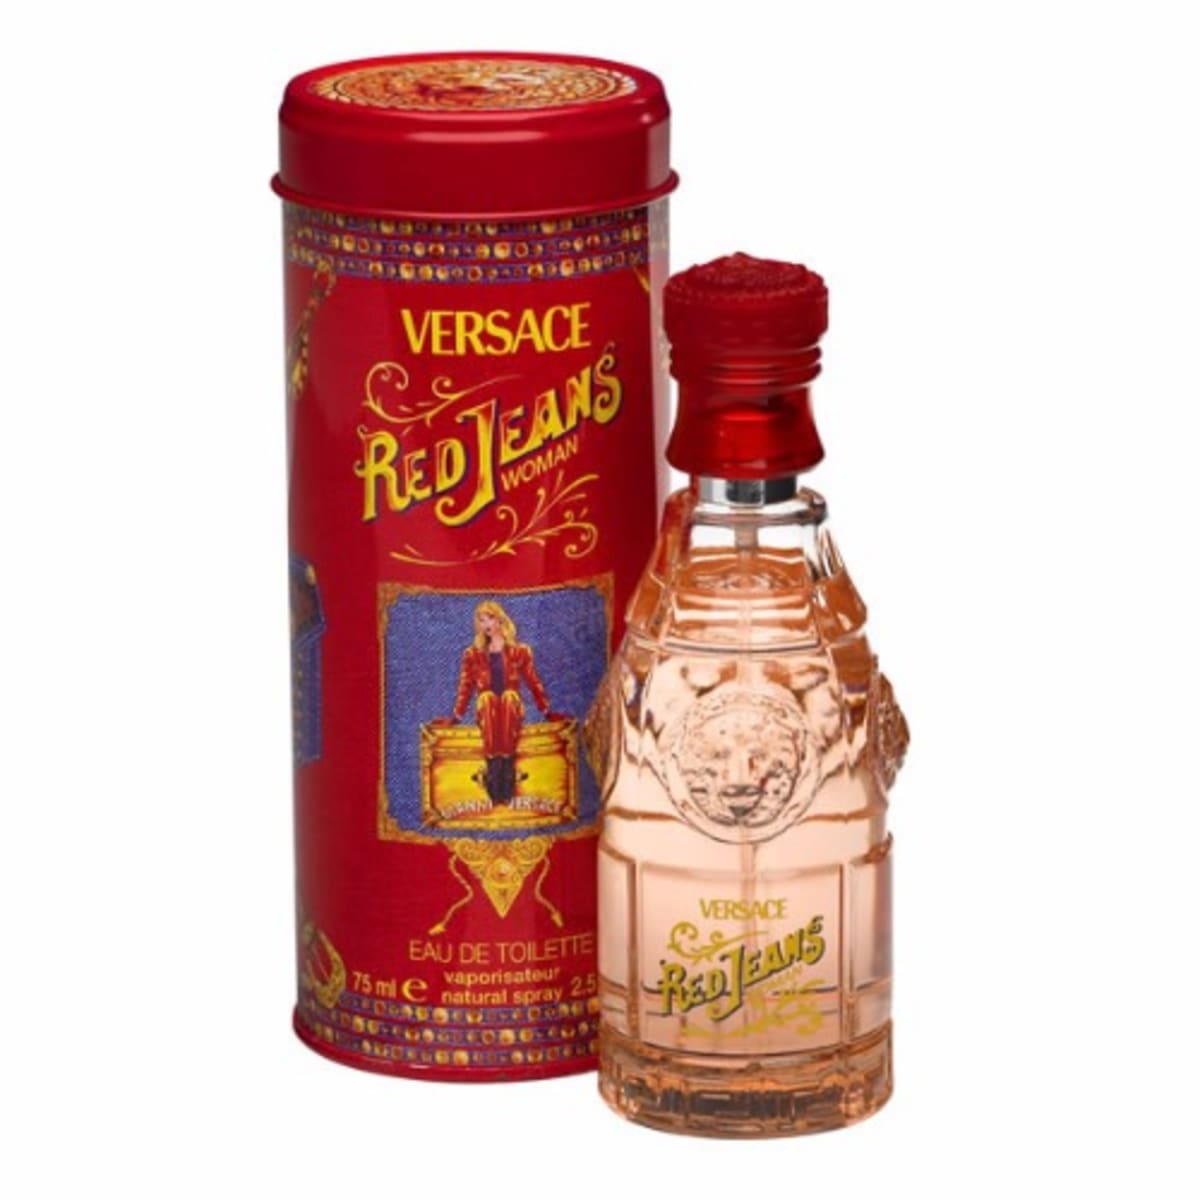 Versace Red Jeans Eau De Toilette For Her - 75ml | Konga Online Shopping